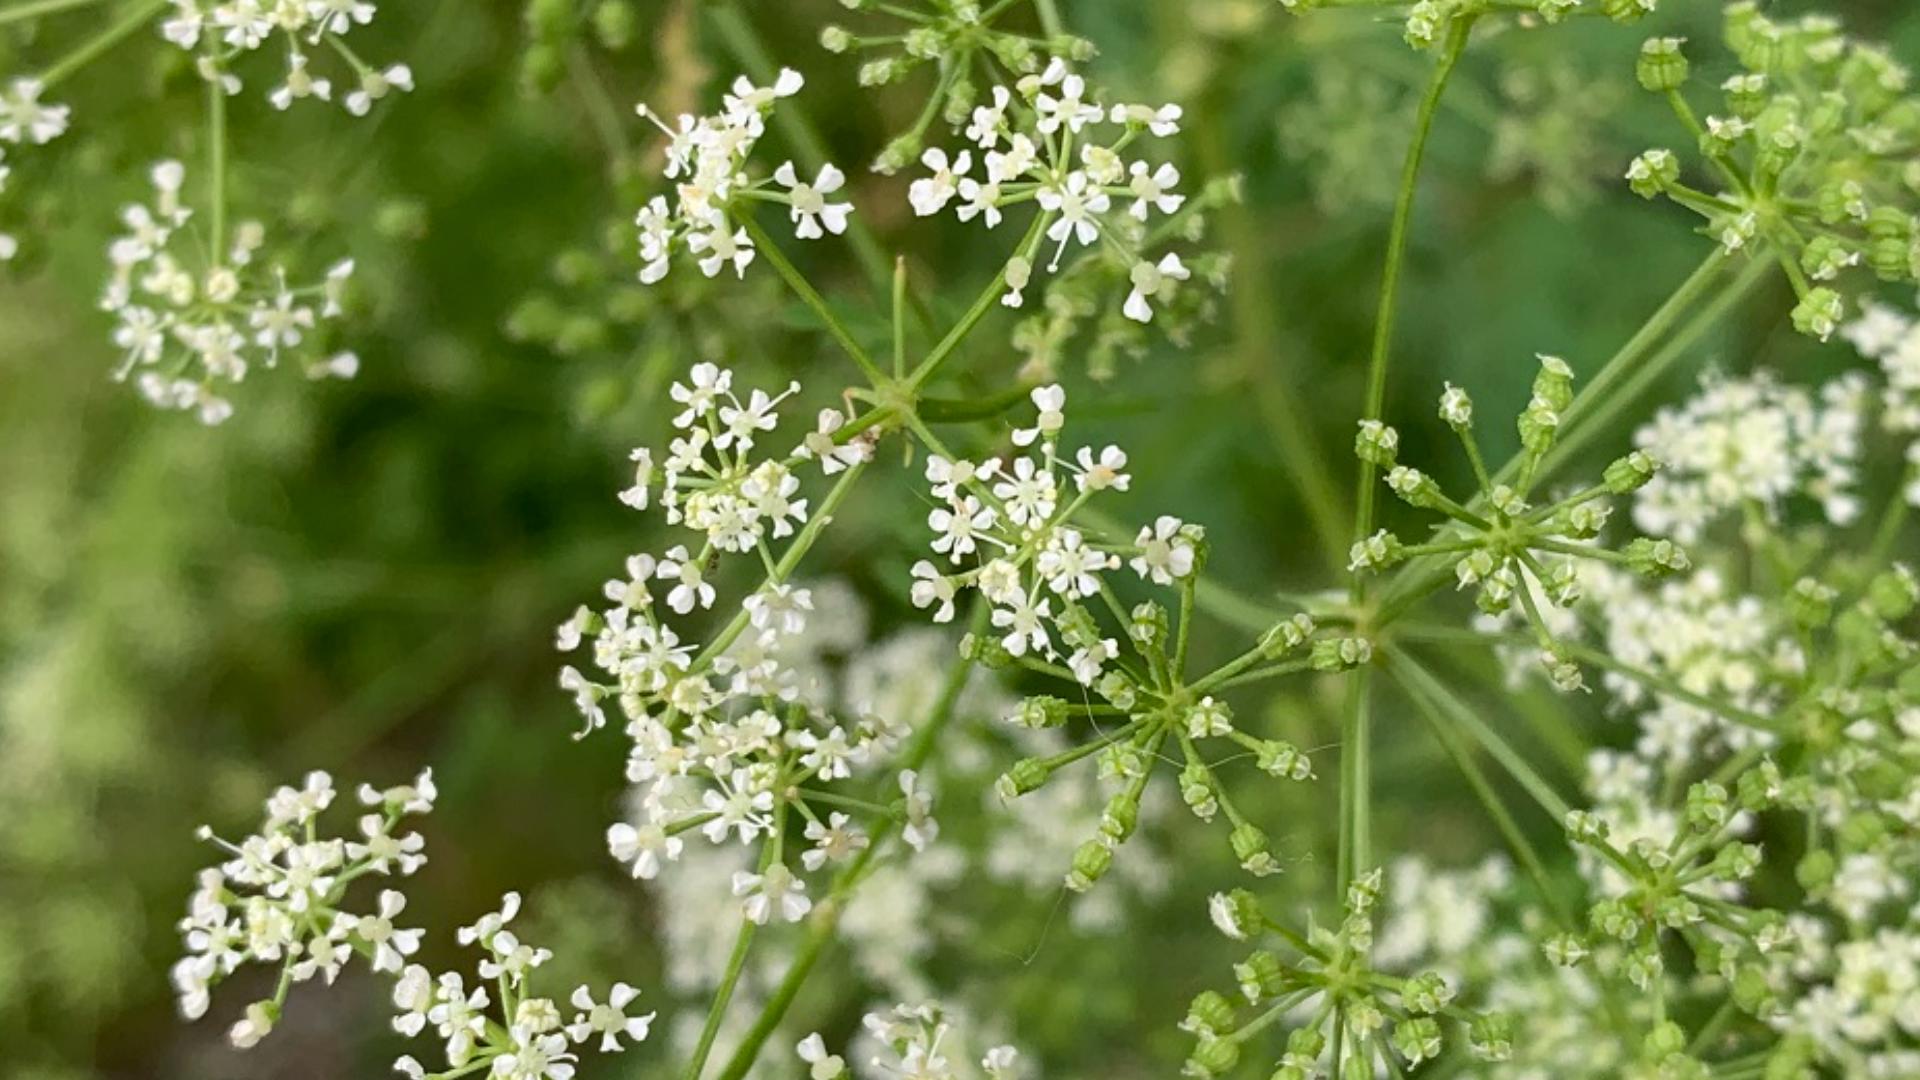 Poison hemlock can grow anywhere between two to 10 feet tall and it greatly resembles Queen Anne’s lace, wild parsnip, wild carrots and wild parsley.